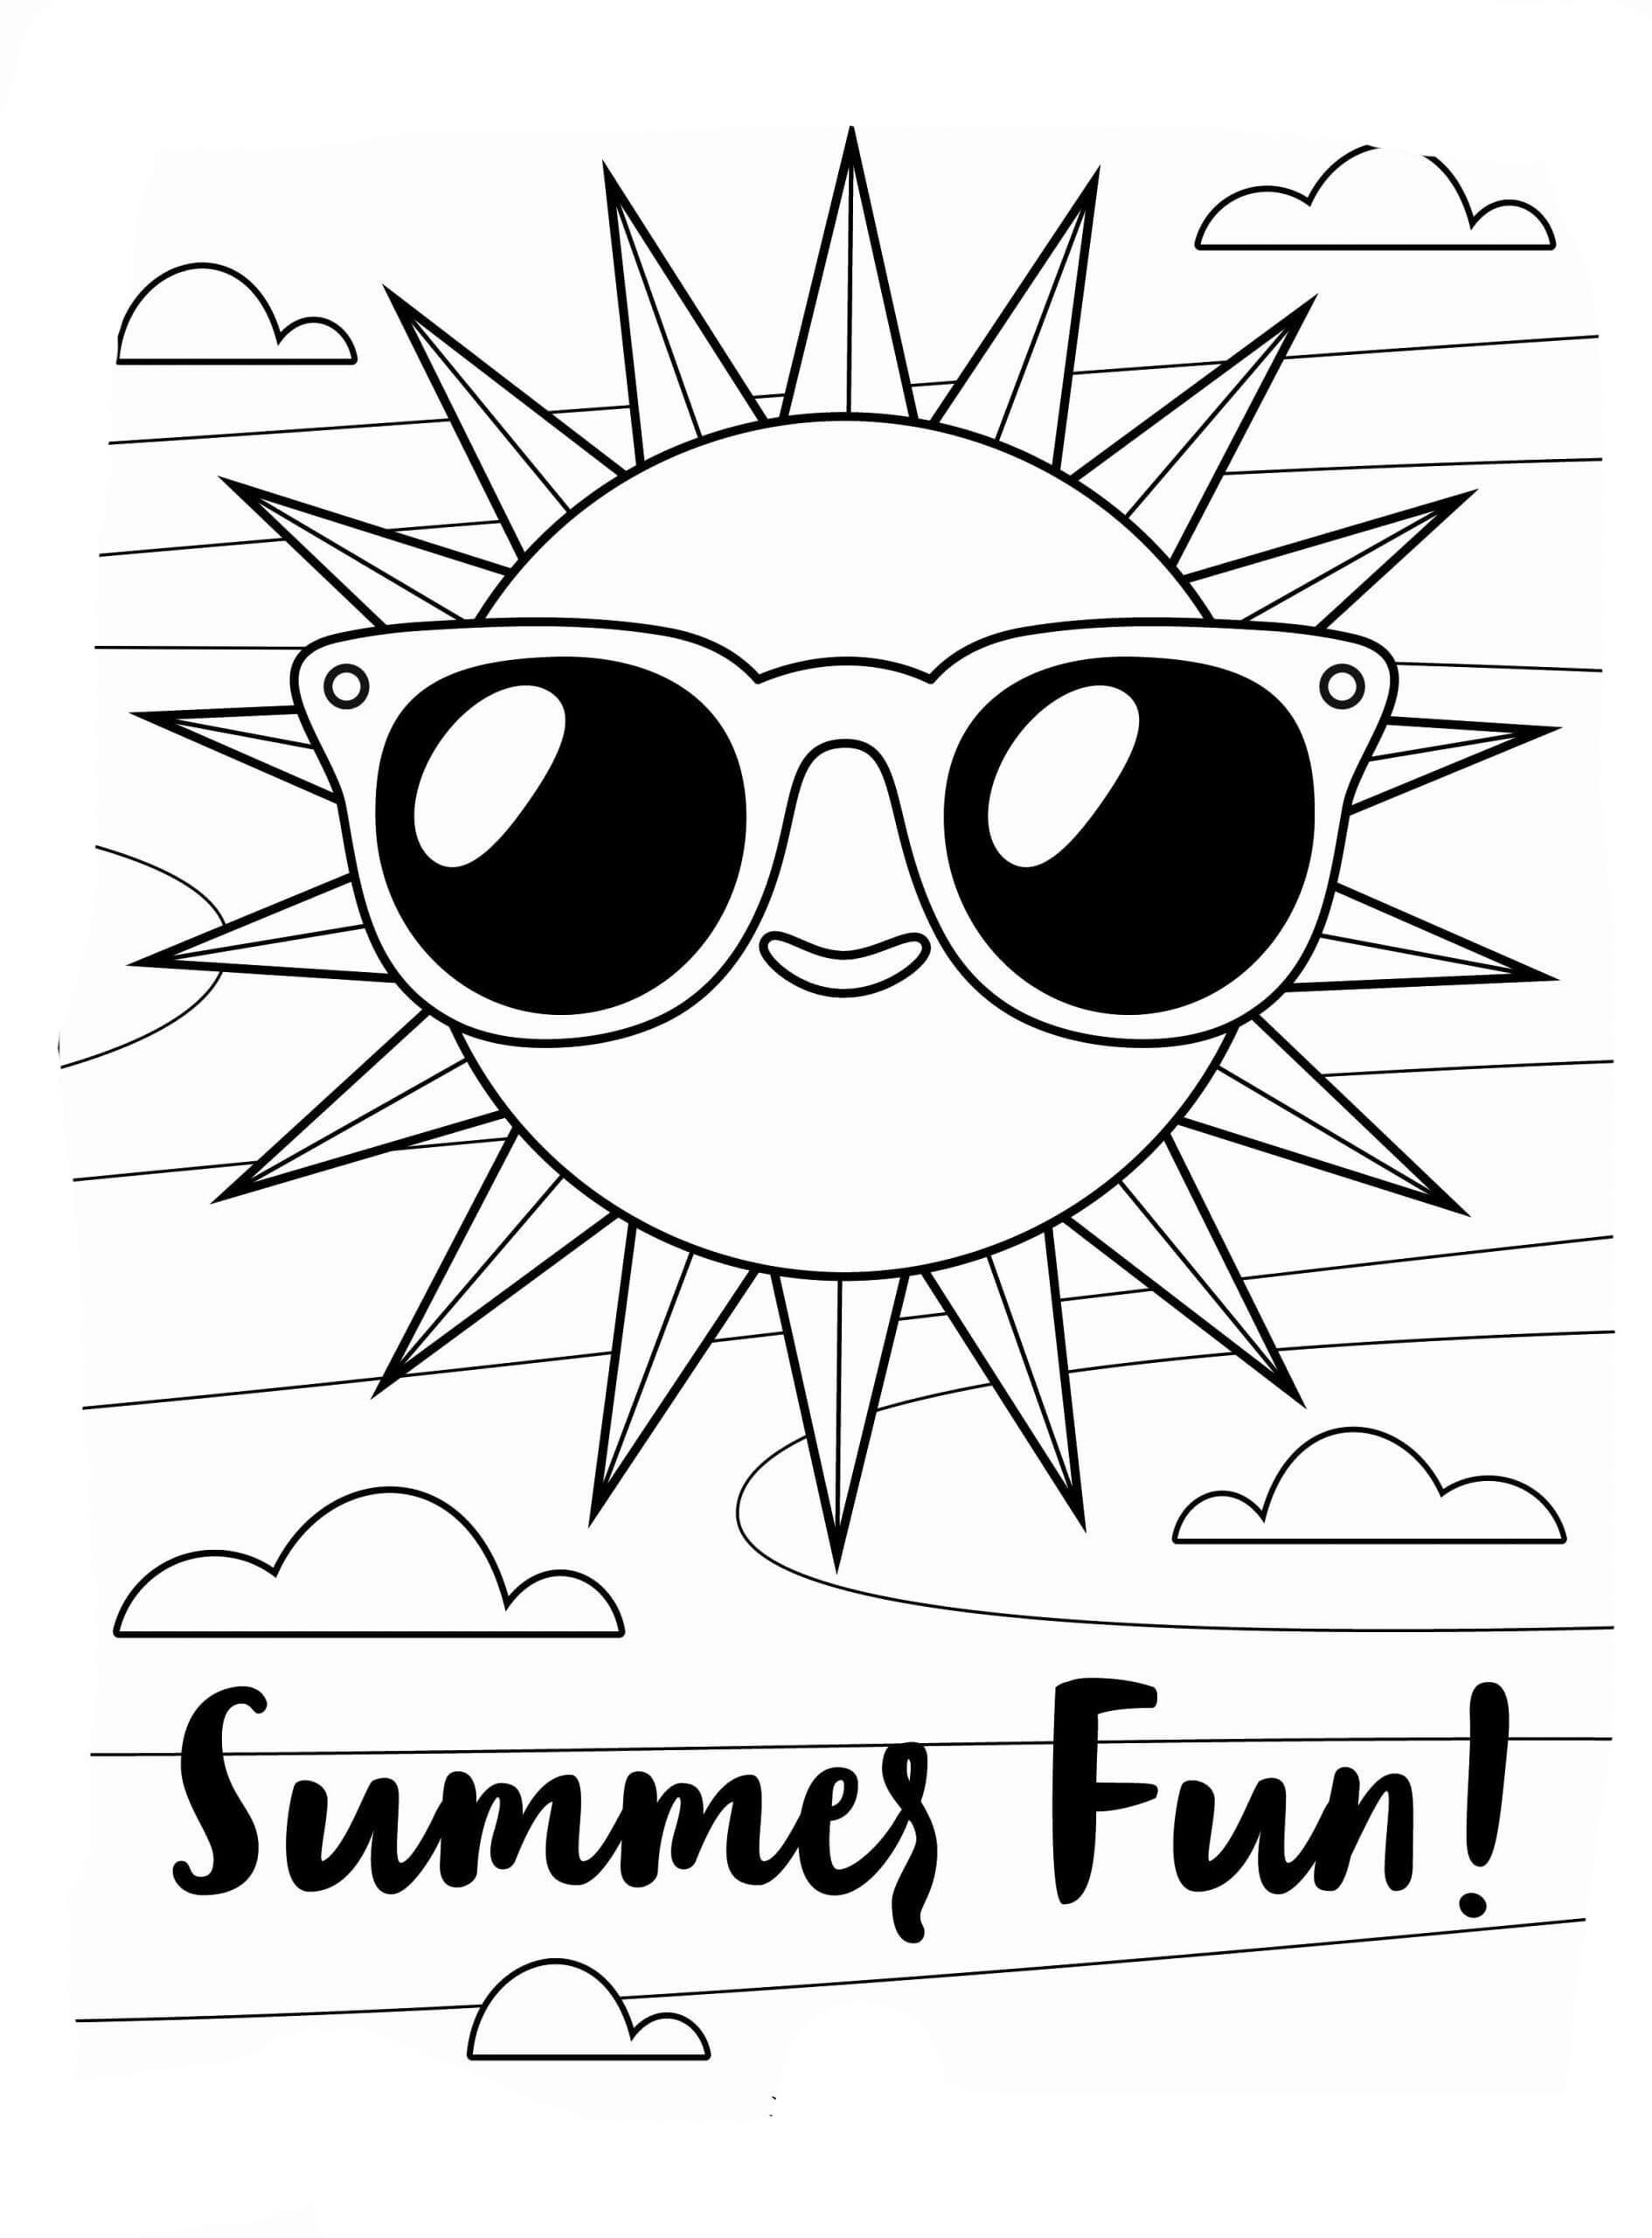 Sun and Summer Coloring Page